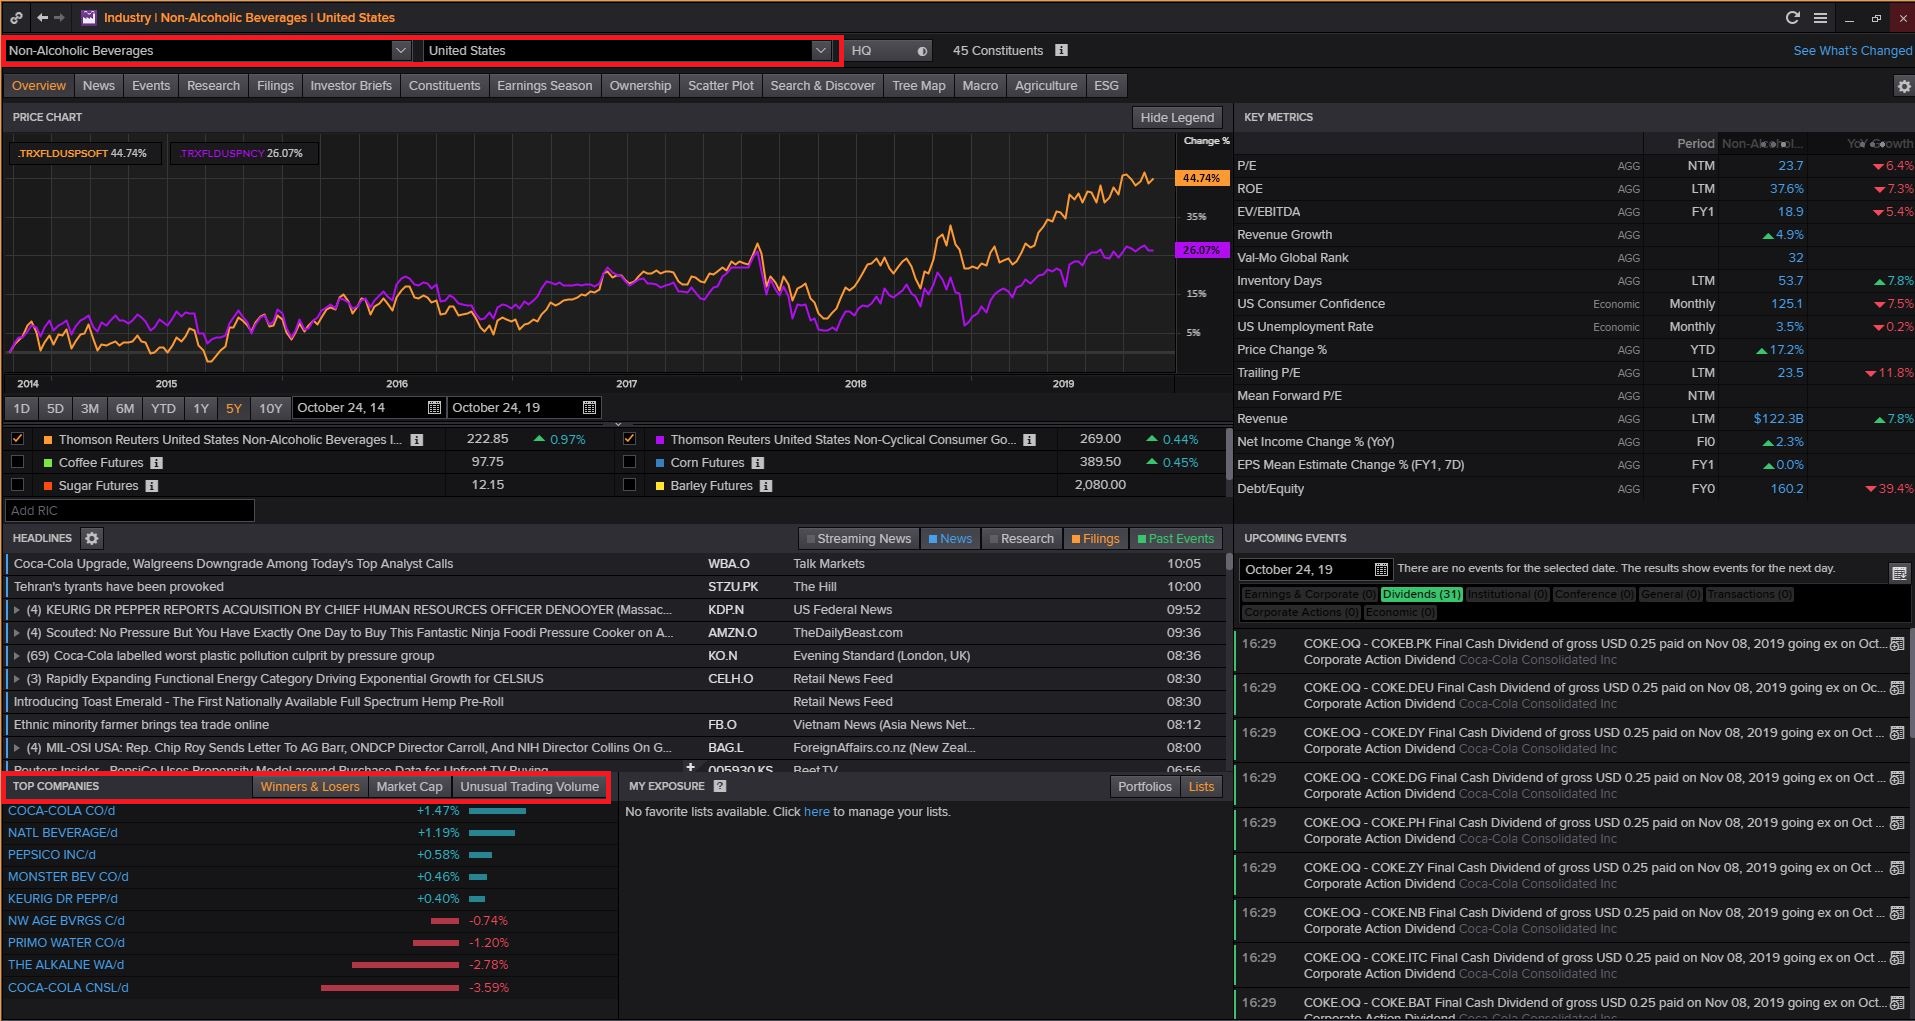 Login to Thomson Reuters Eikon (Available Only in Library) then Type INDUS and Search and Select Telecommunication Services and Select Country and Click on Top Companies